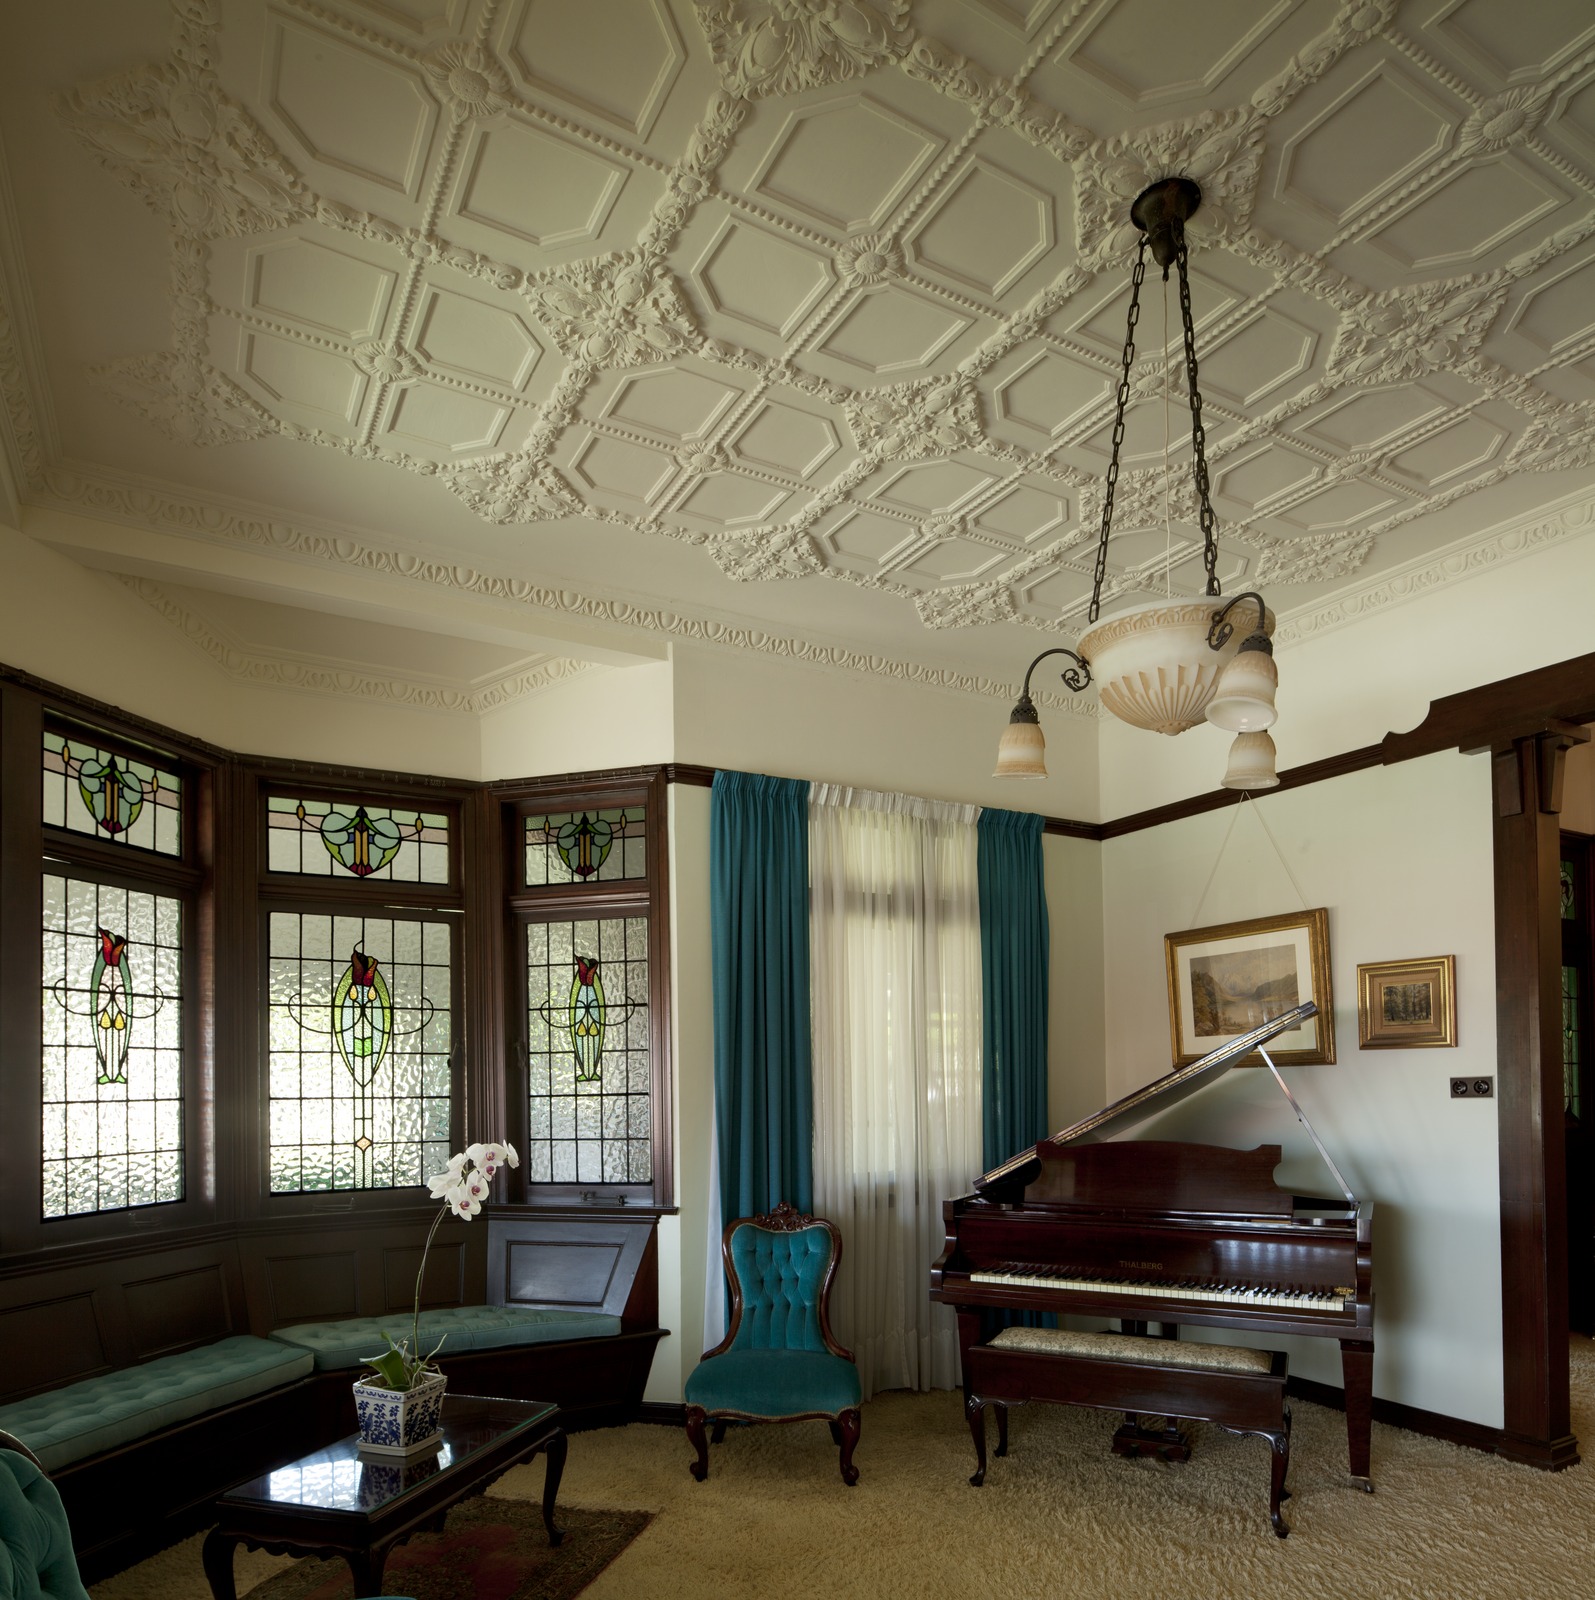 Photograph by Richard Stringer of interior of Clonlara, a historic house at Clayfield, 2018.